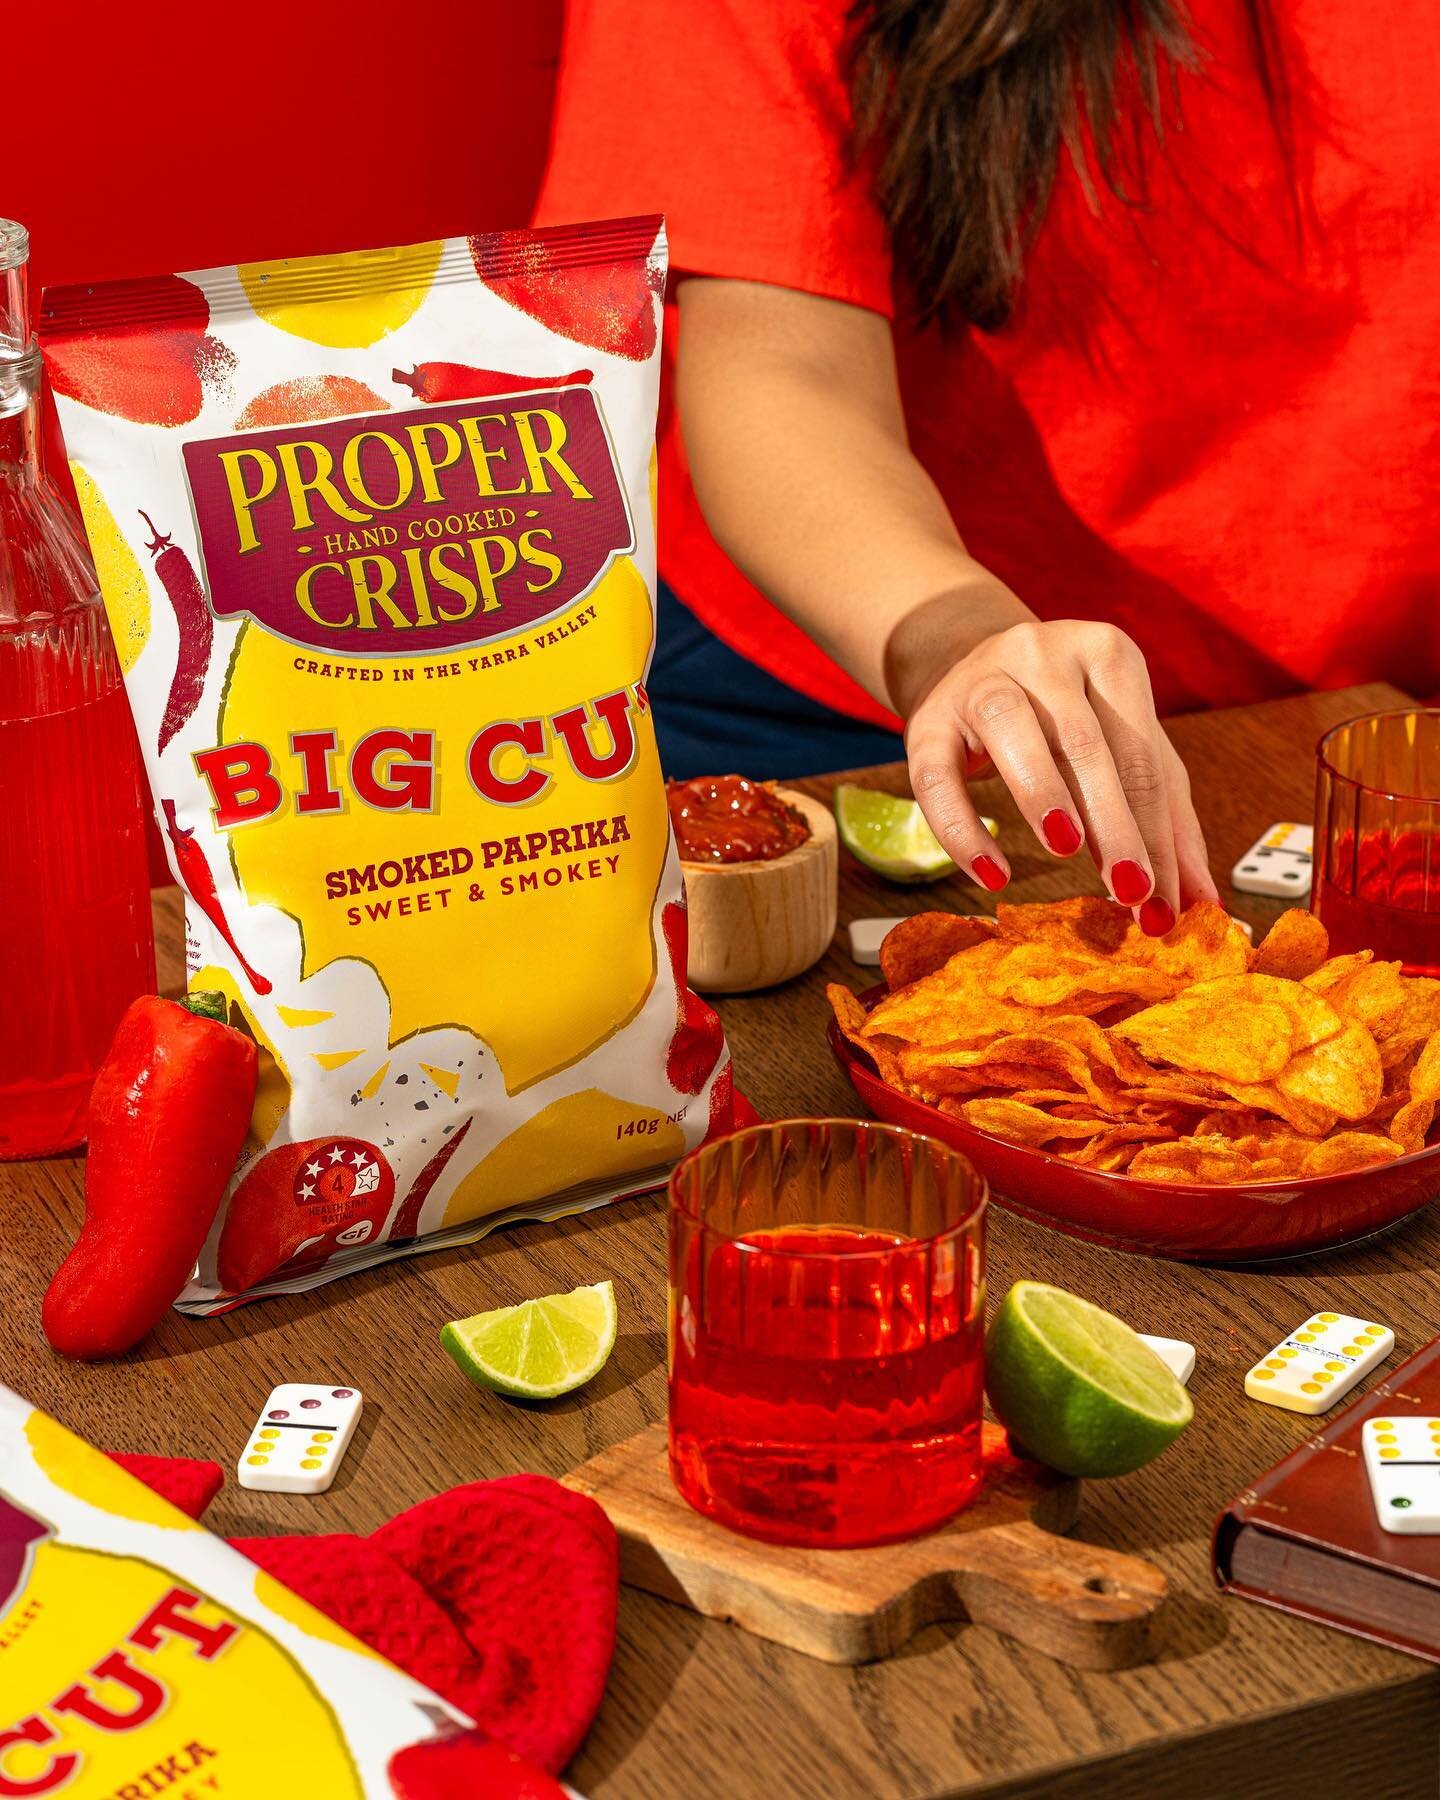 Adding some 🌶️ to my feed 😅.

Product styling, photography and editing for @propercrisps ✨. My most favourite shoot of this year! 

See how we&rsquo;ve used similar props and created three sets out of it, each one with the same backdrop and surface